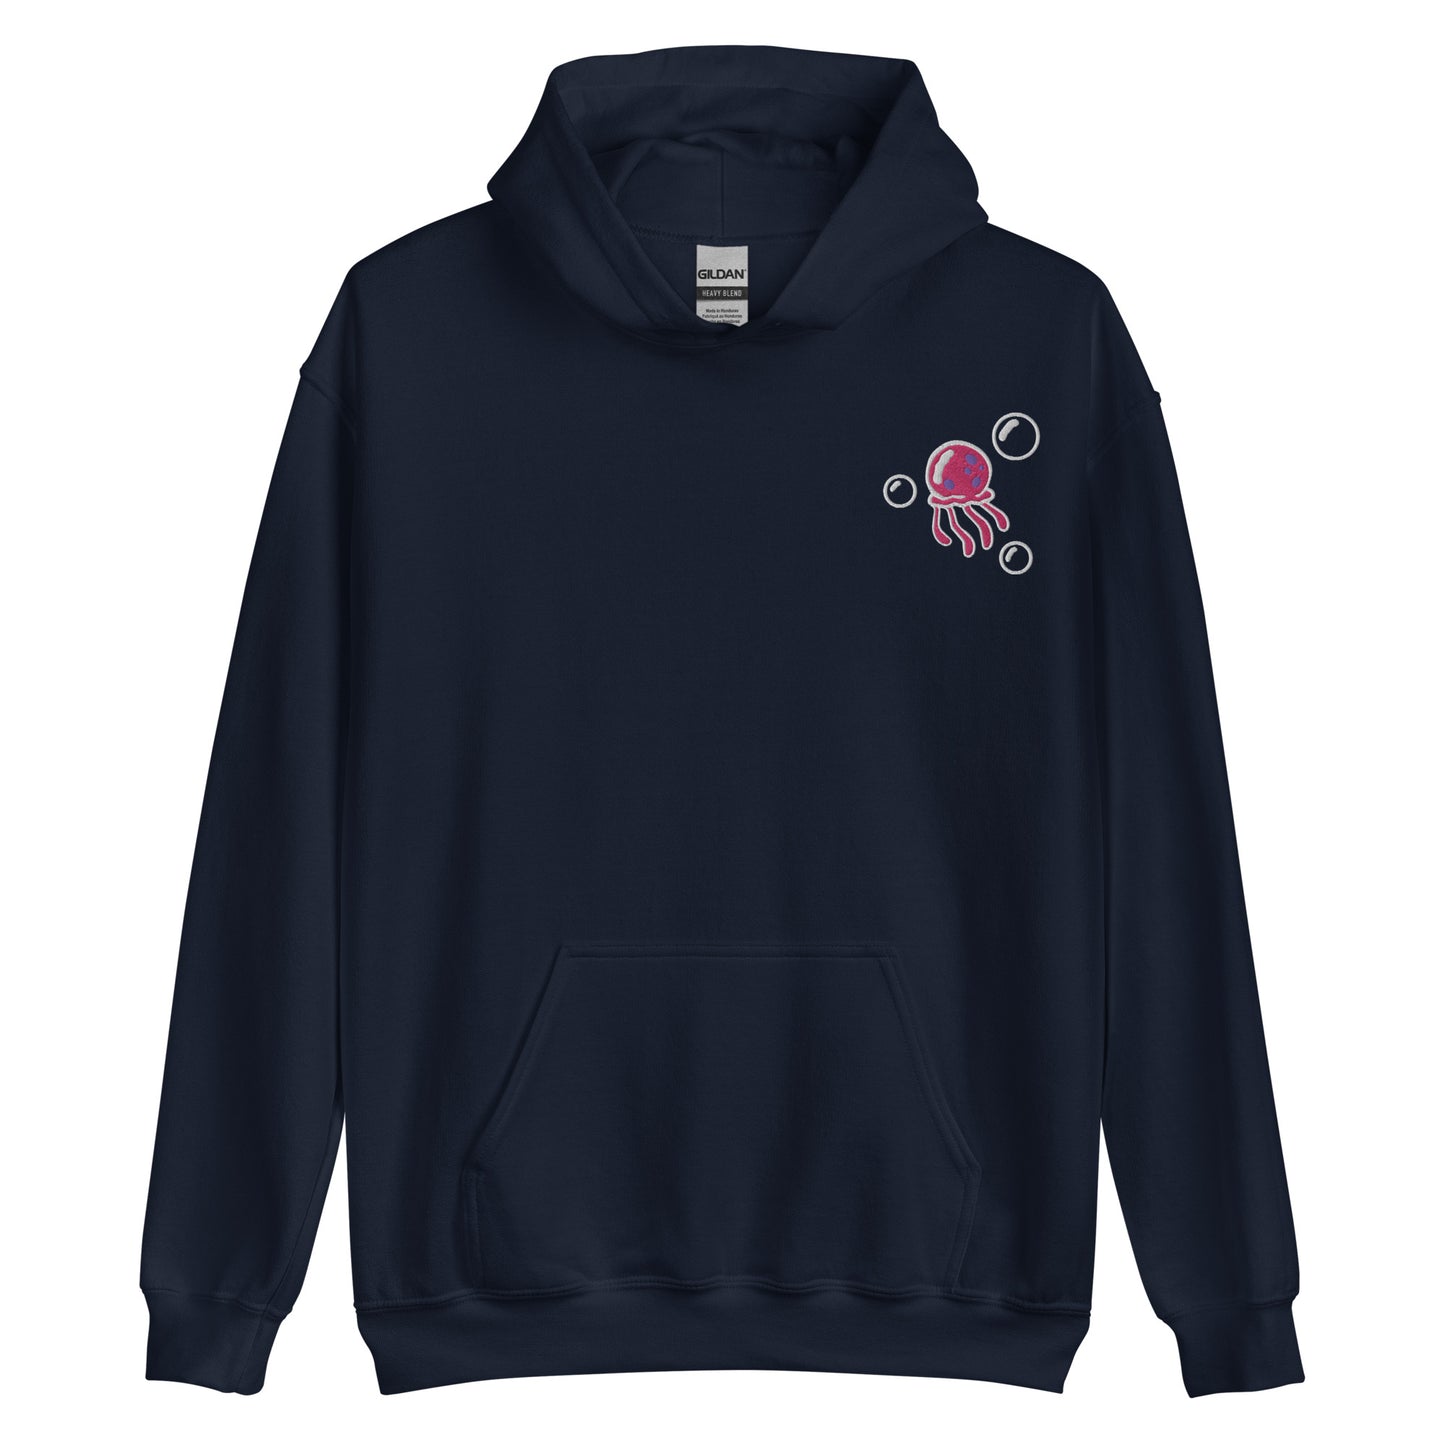 Jellyfish PINK embroidered pullover hoodie